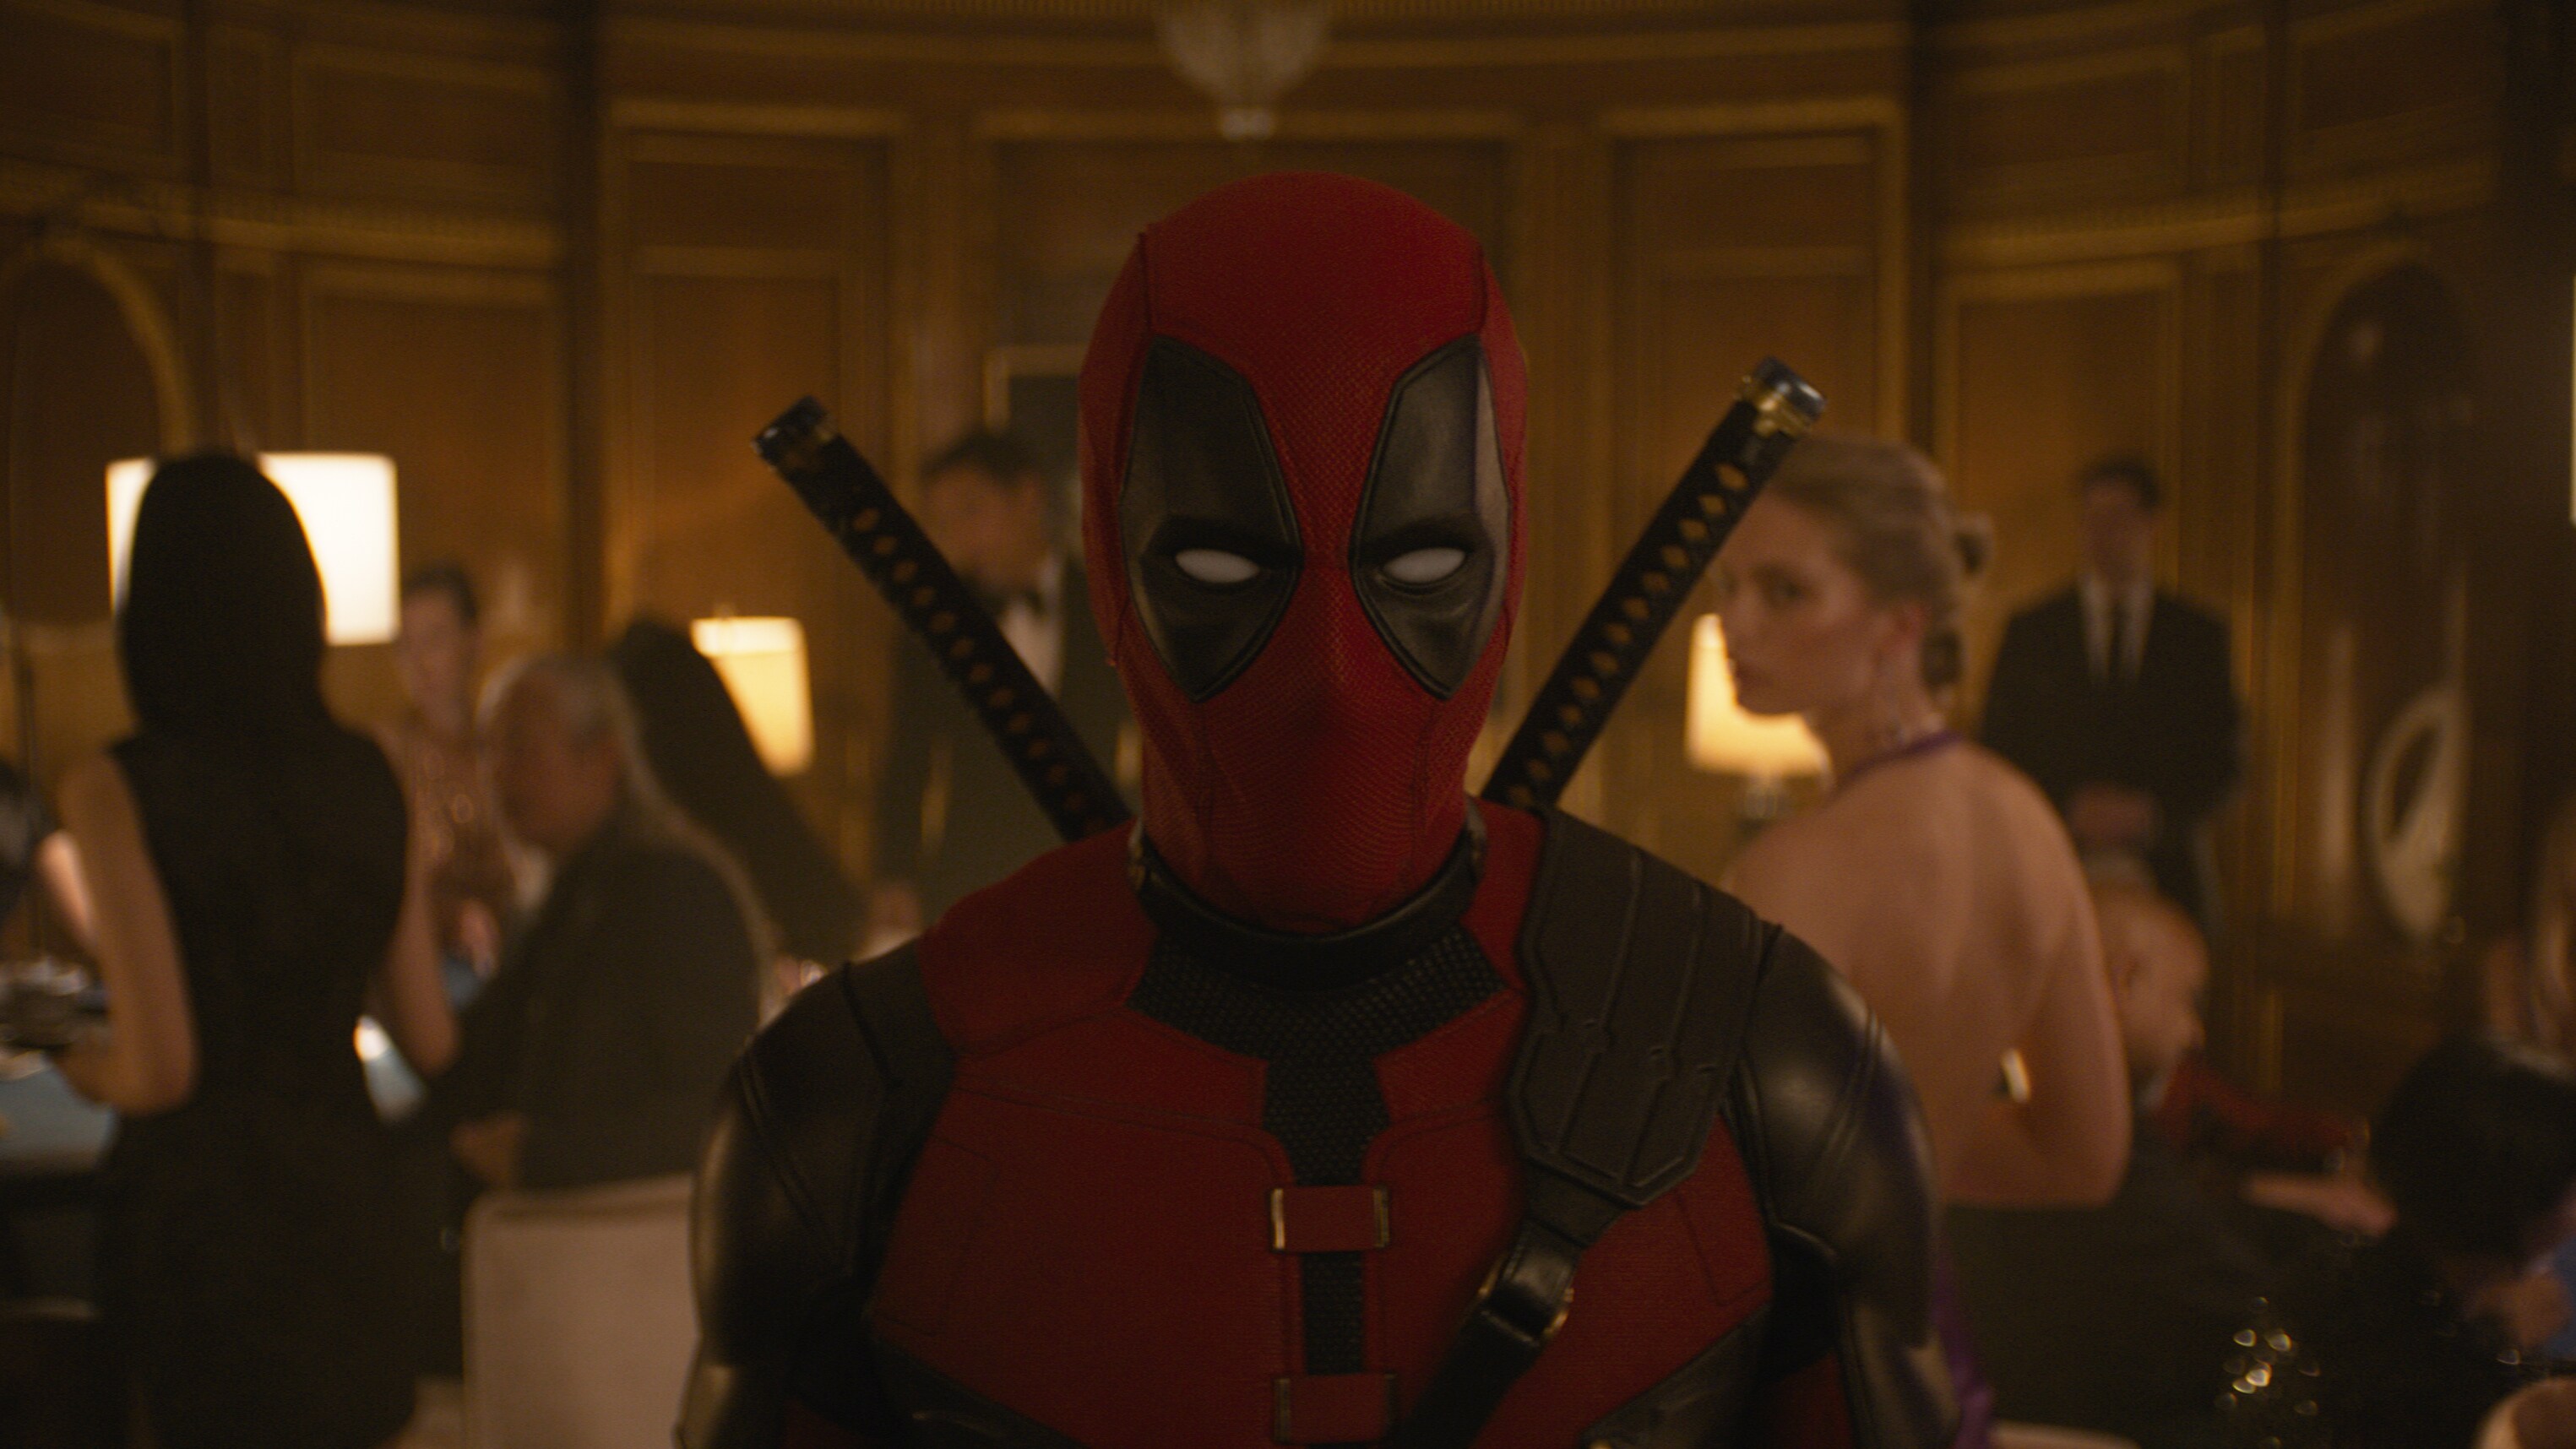 Deadpool aka Wade Wilson (actor Ryan Reynolds) standing inside a room full of party guests from the film "Marvel Studios' Deadpool & Wolverine".